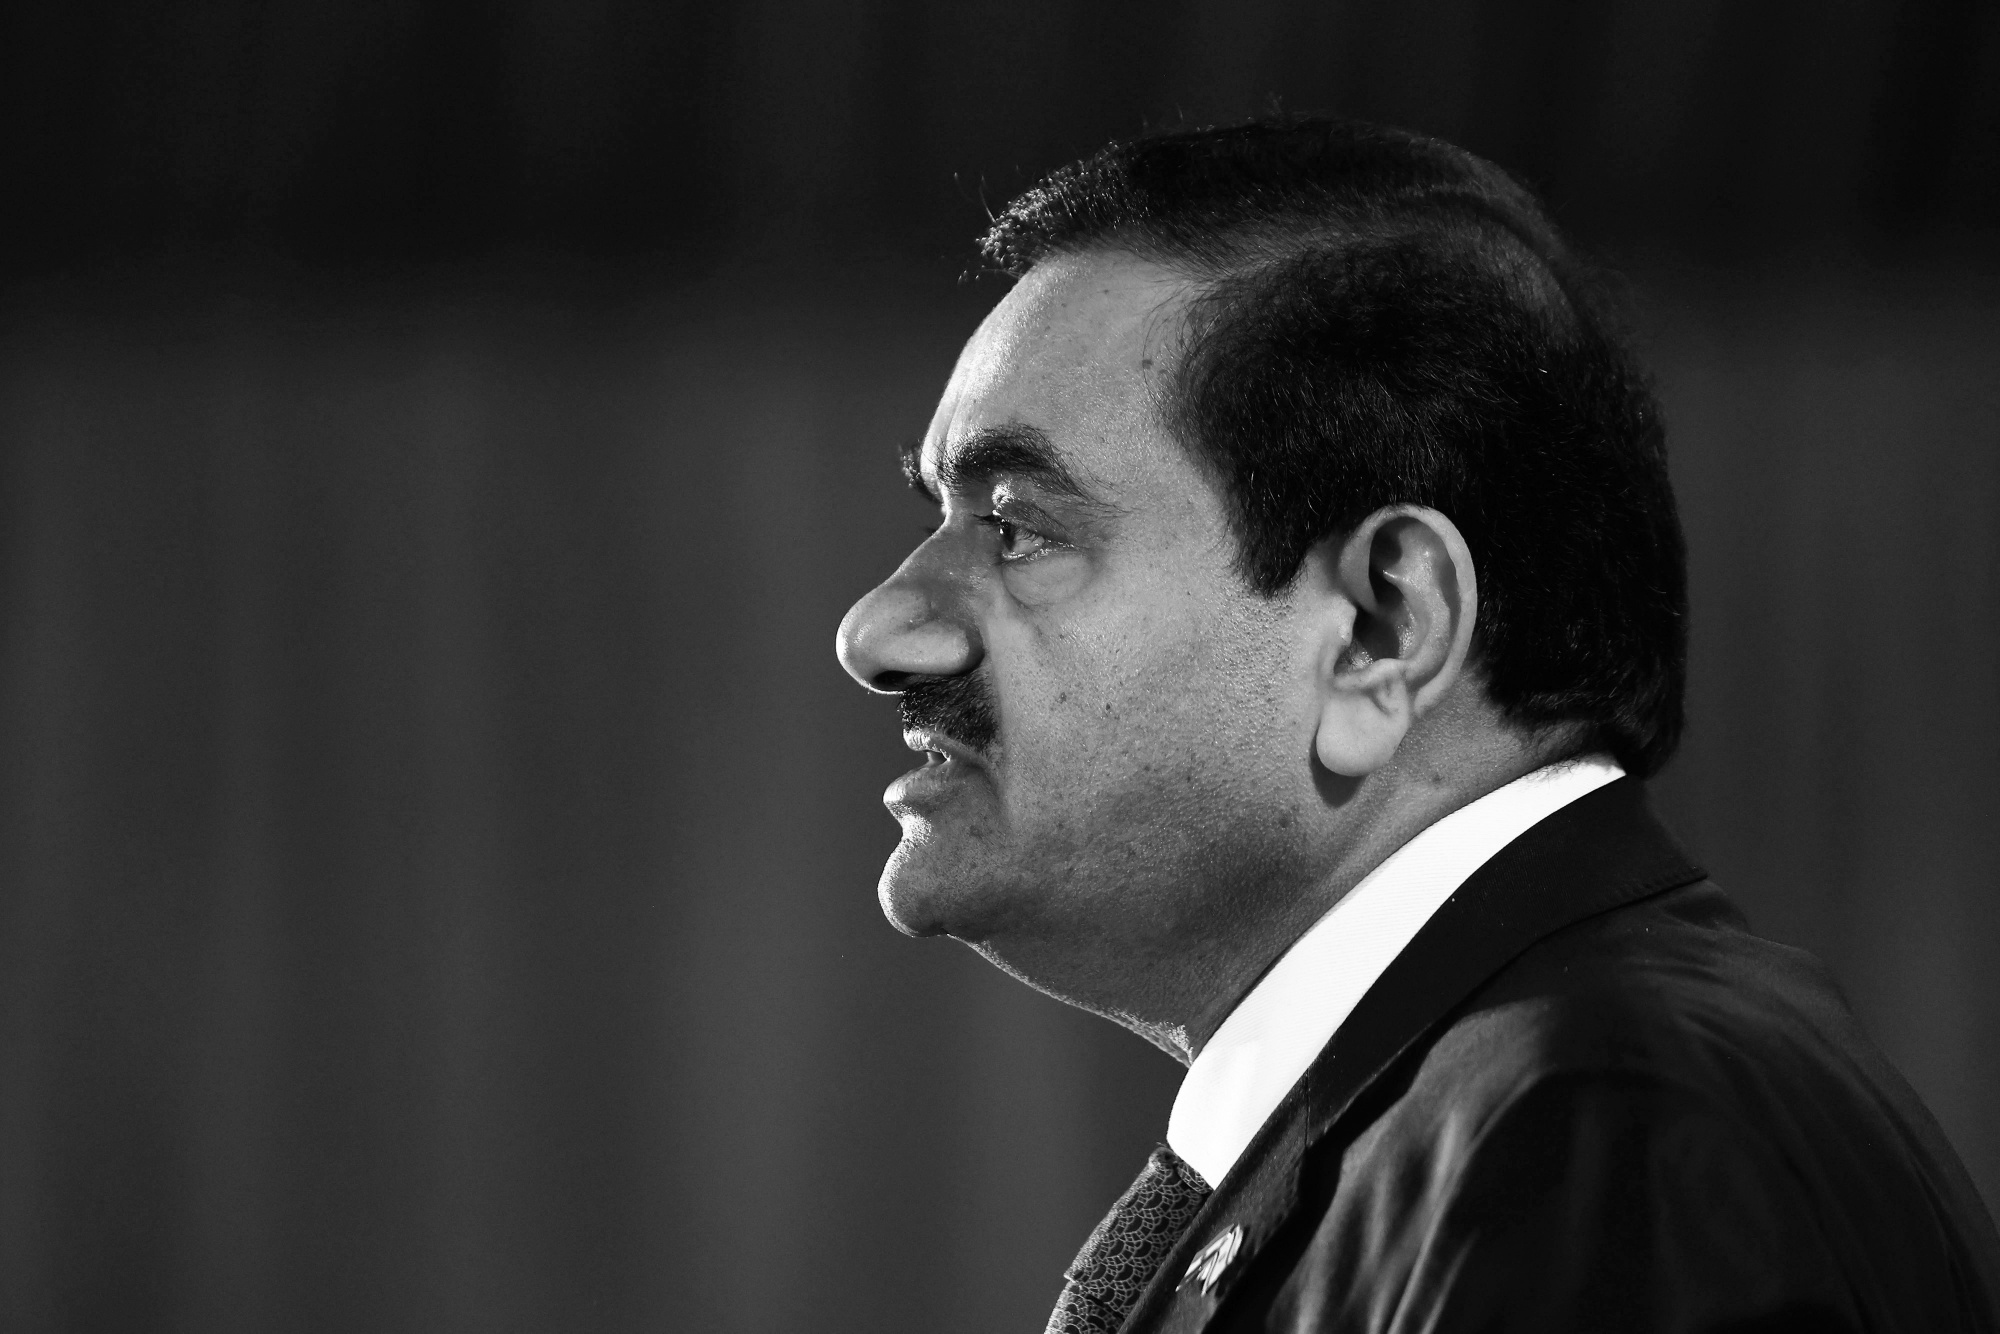 Indian billionaire Gautam Adani was a college dropout. Now he may